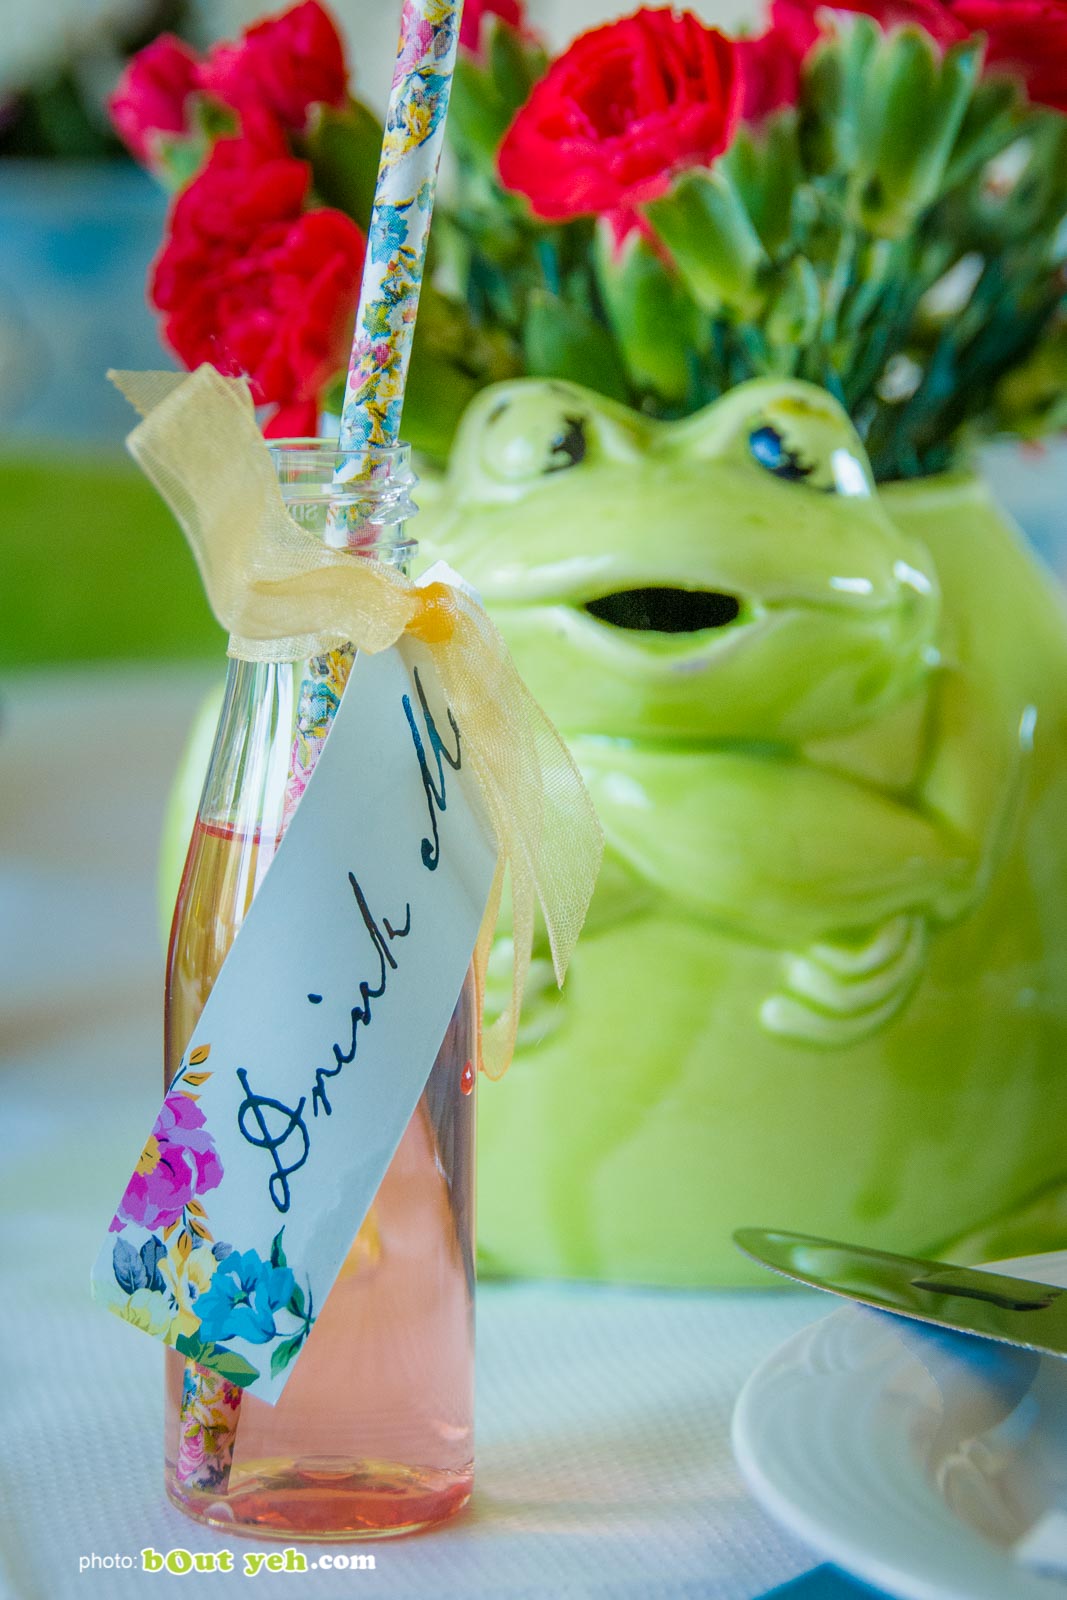 Drink Me illustration on small bottle at the Bout Yeh Brexit Mad Hatters Tea Party - photo 9233 by Bout Yeh photographers and video production Belfast Northern Ireland